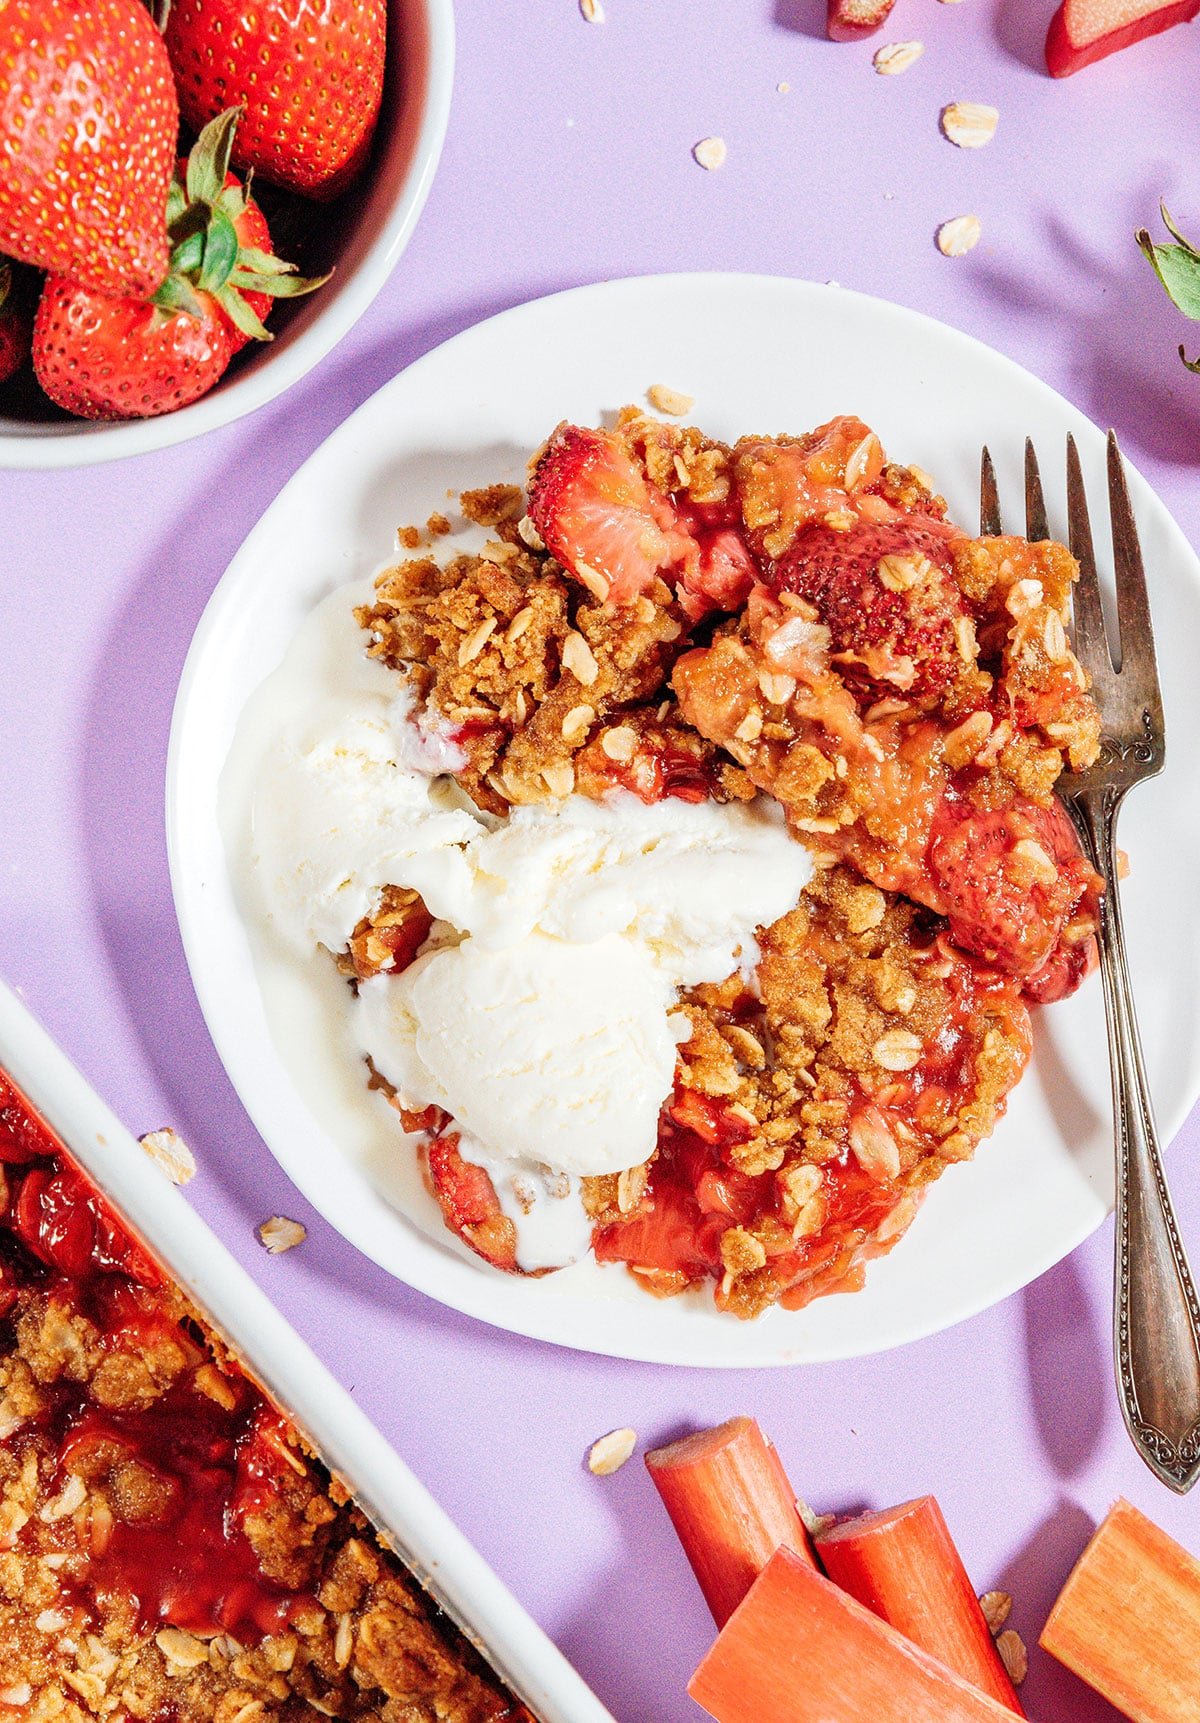 Rhubarb crisp with ice cream on a plate with a fork